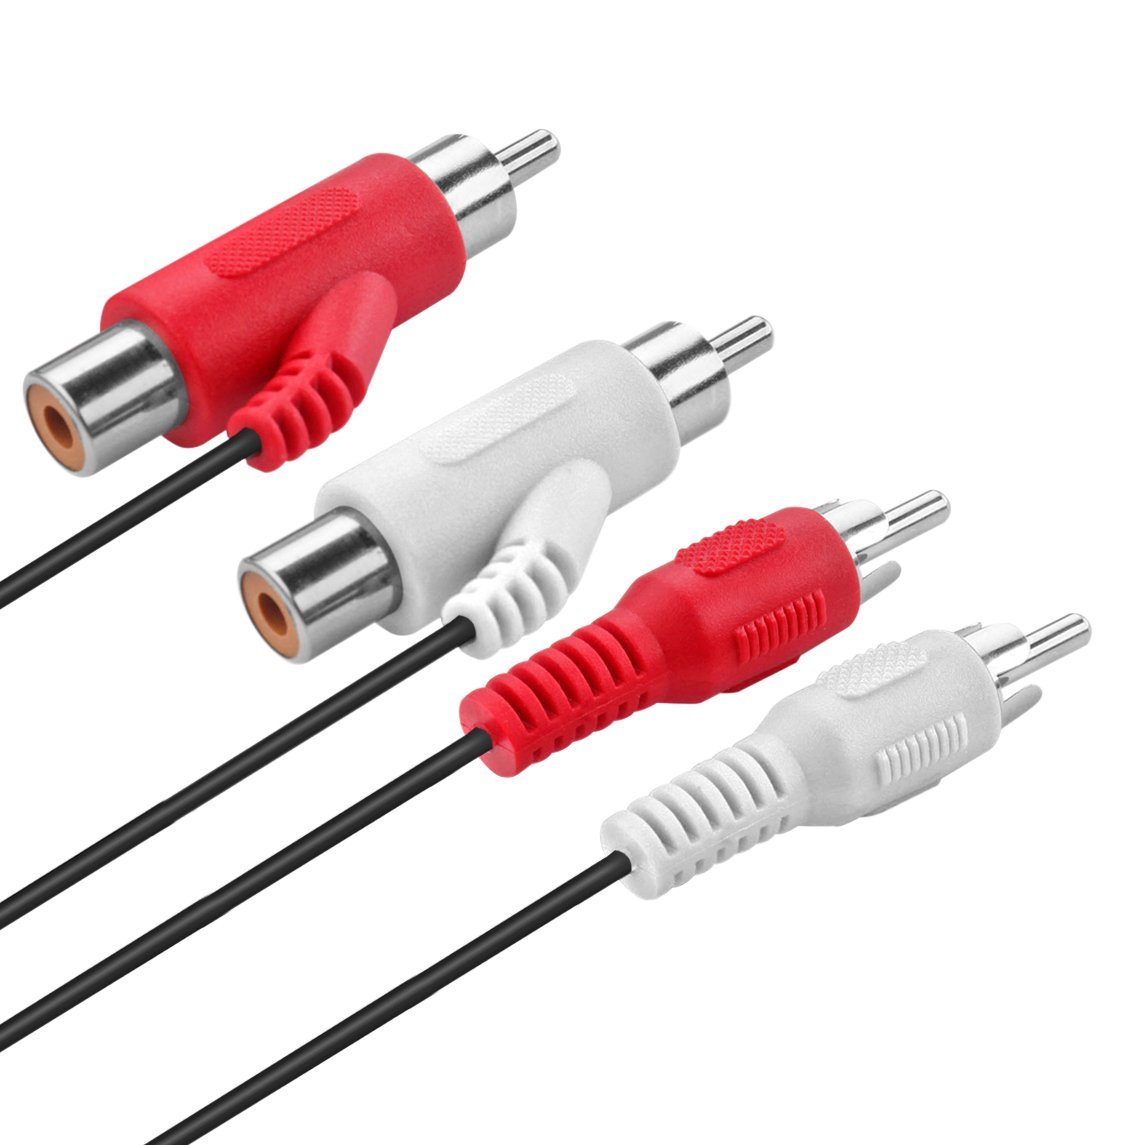 RCA Audio Piggyback Cable, 2 RCA Male to 2 RCA Male + RCA Female Piggyback (12ft) - image 2 of 3